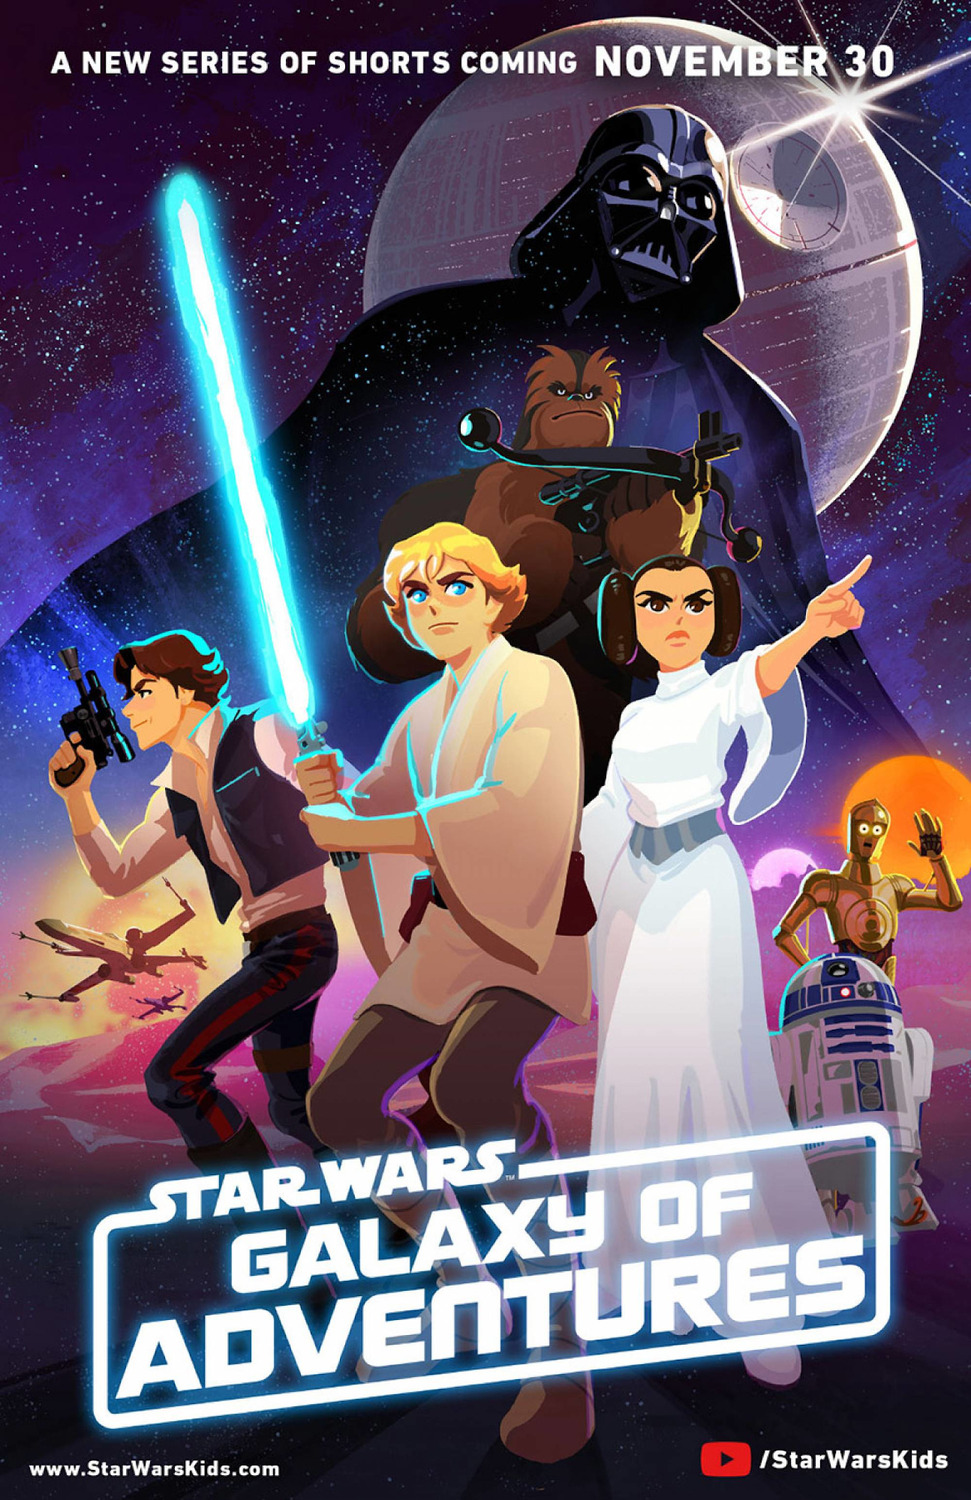 Extra Large TV Poster Image for Star Wars Galaxy of Adventures 